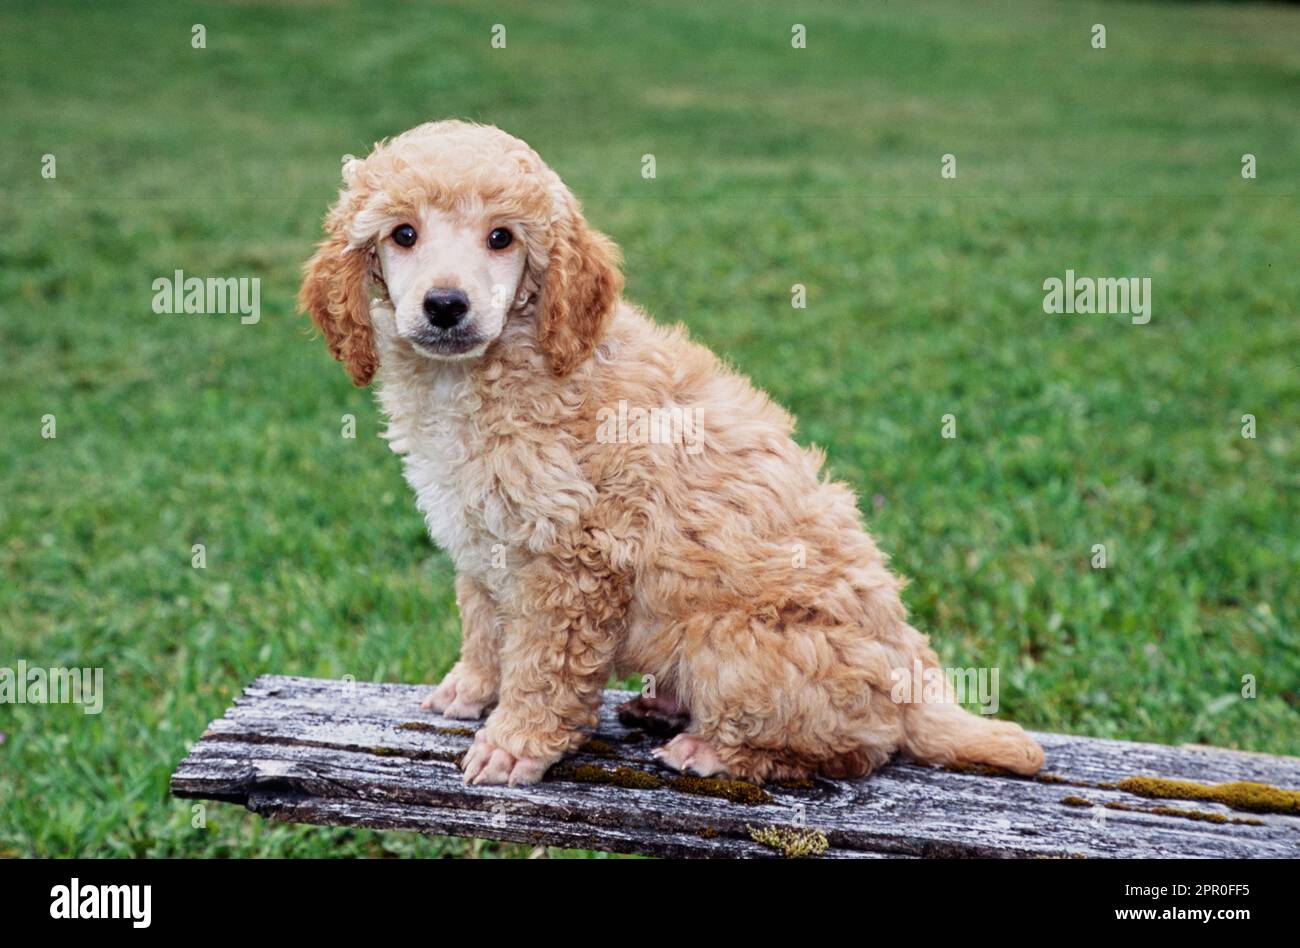 Mini Poodle puppy on a plank Stock Photo